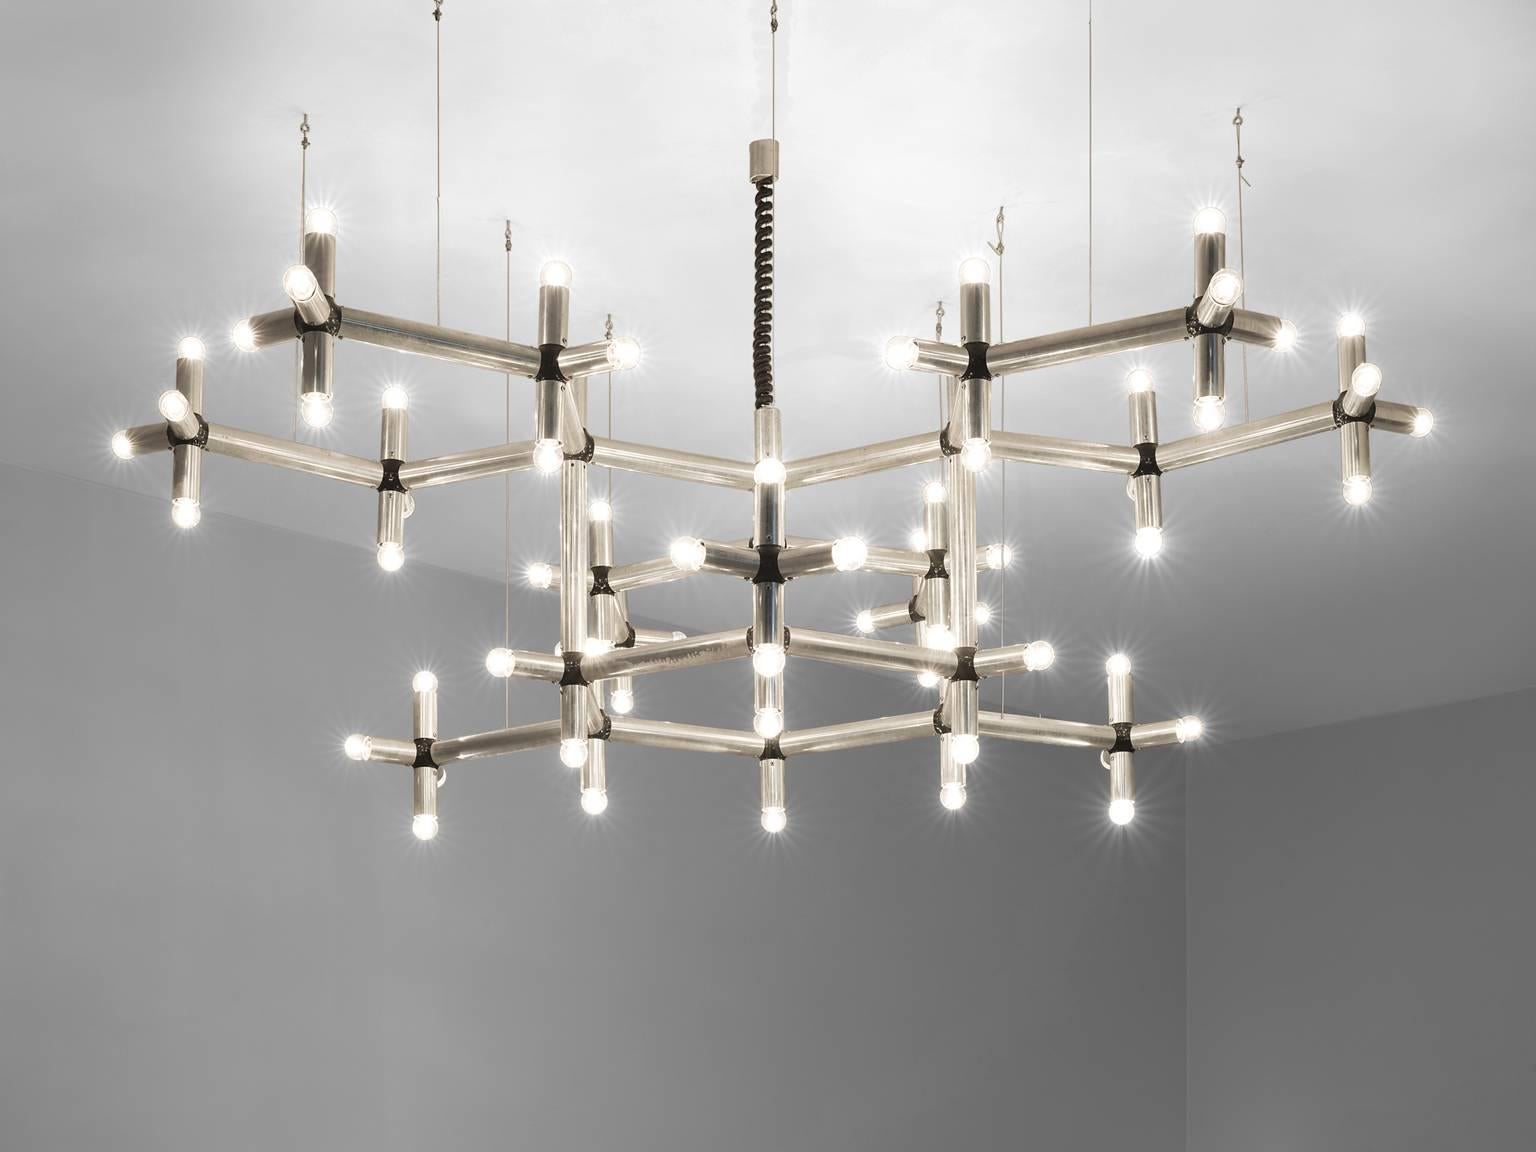 Robert Haussmann, chandelier, polished steel with 70 bulbs, Europe, 1970s.

This chandelier is part of the Morentz midcentury design collection. The chandelier is executed in chromed steel and features a frame that spreads out as if it were a